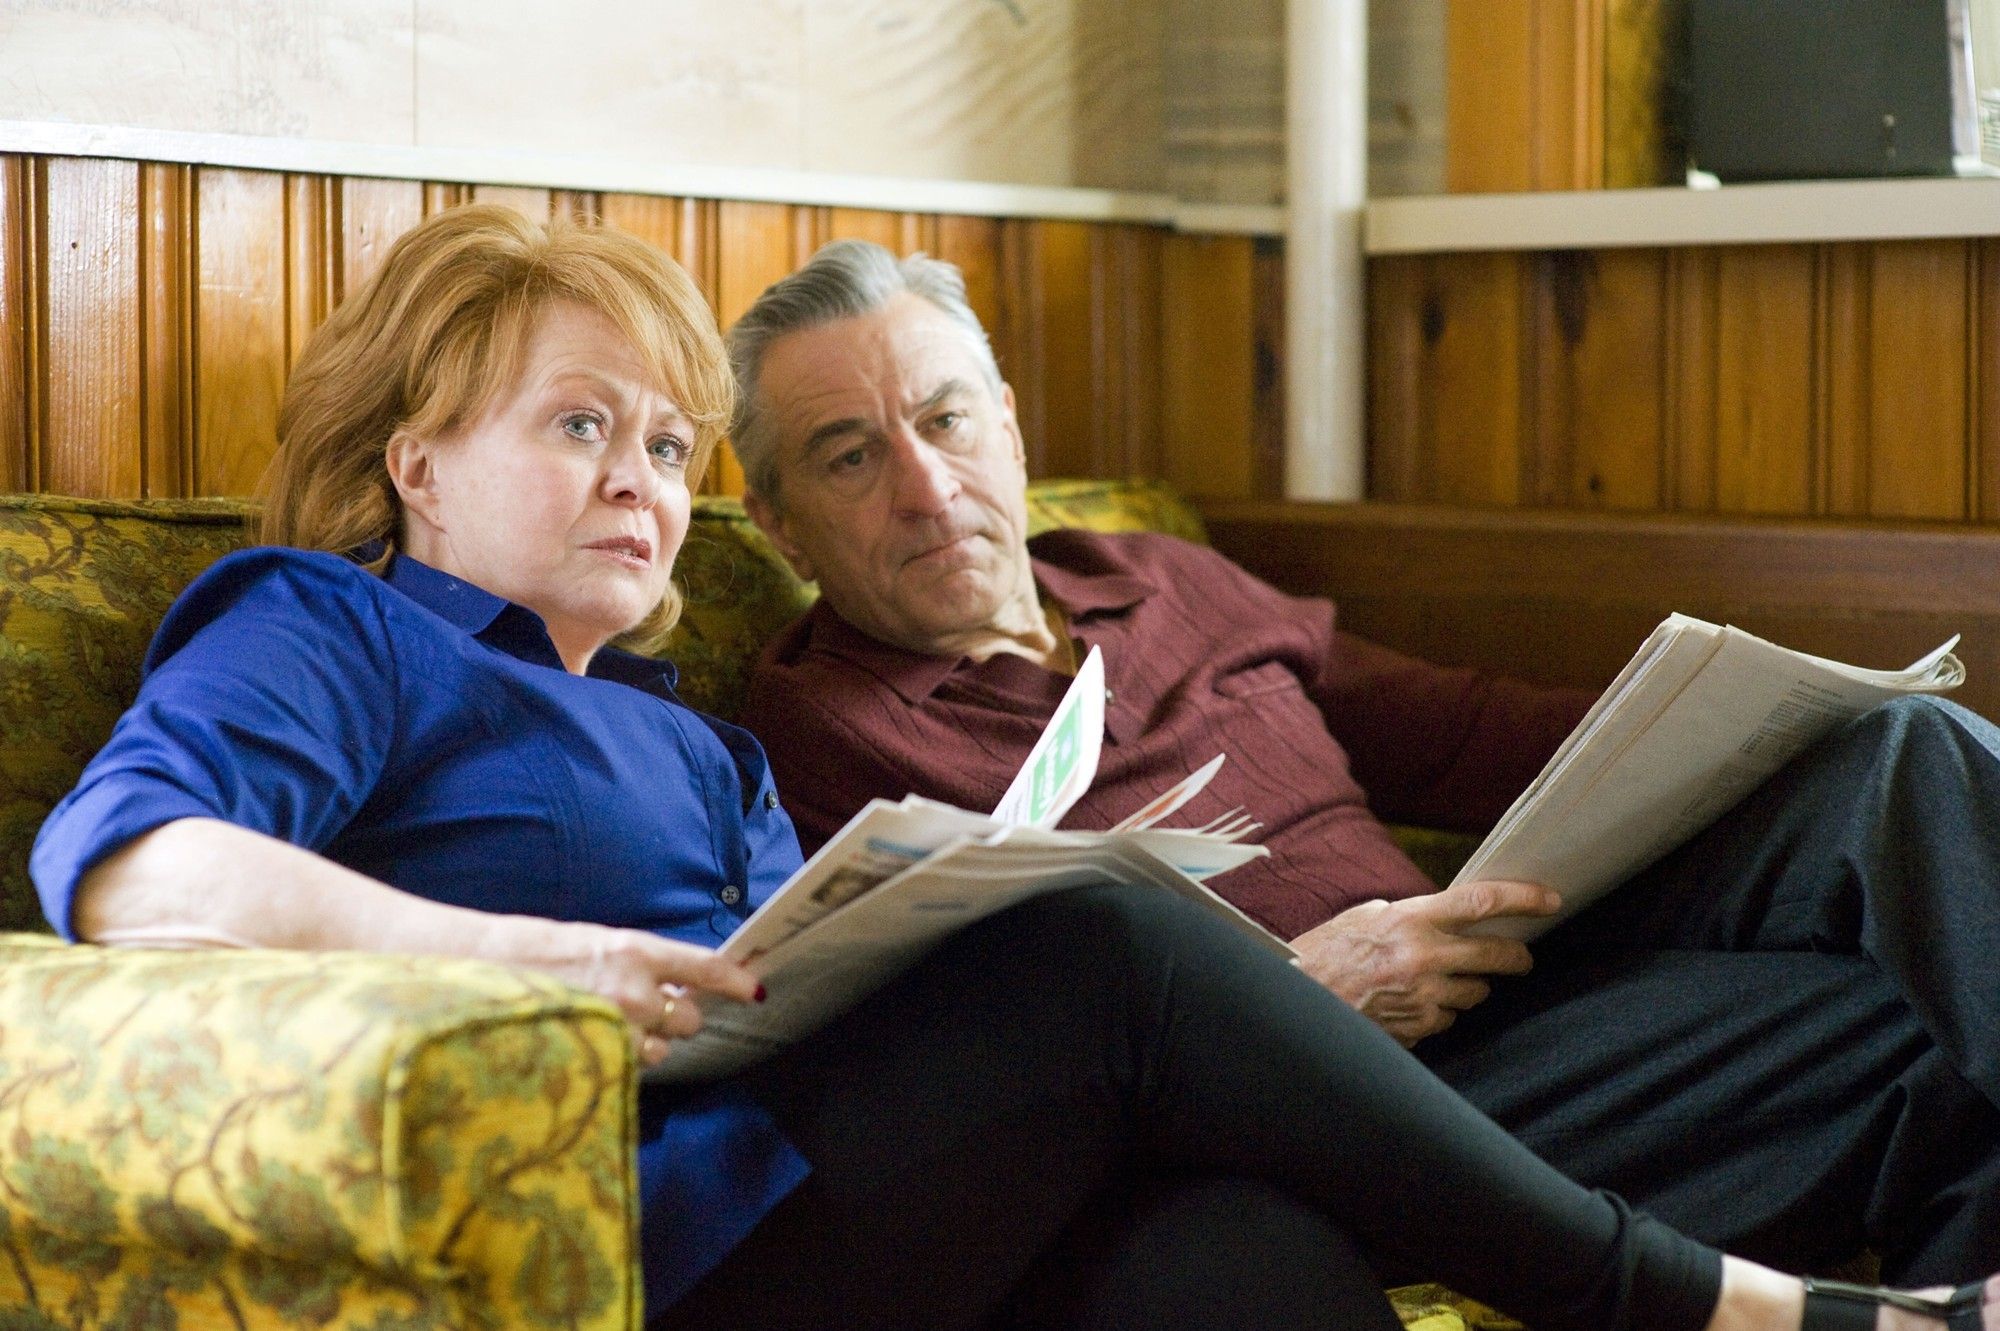 Jacki Weaver stars as Dolores Solitano and Robert De Niro stars as Pat Solitano Sr. in The Weinstein Company's Silver Linings Playbook (2013)